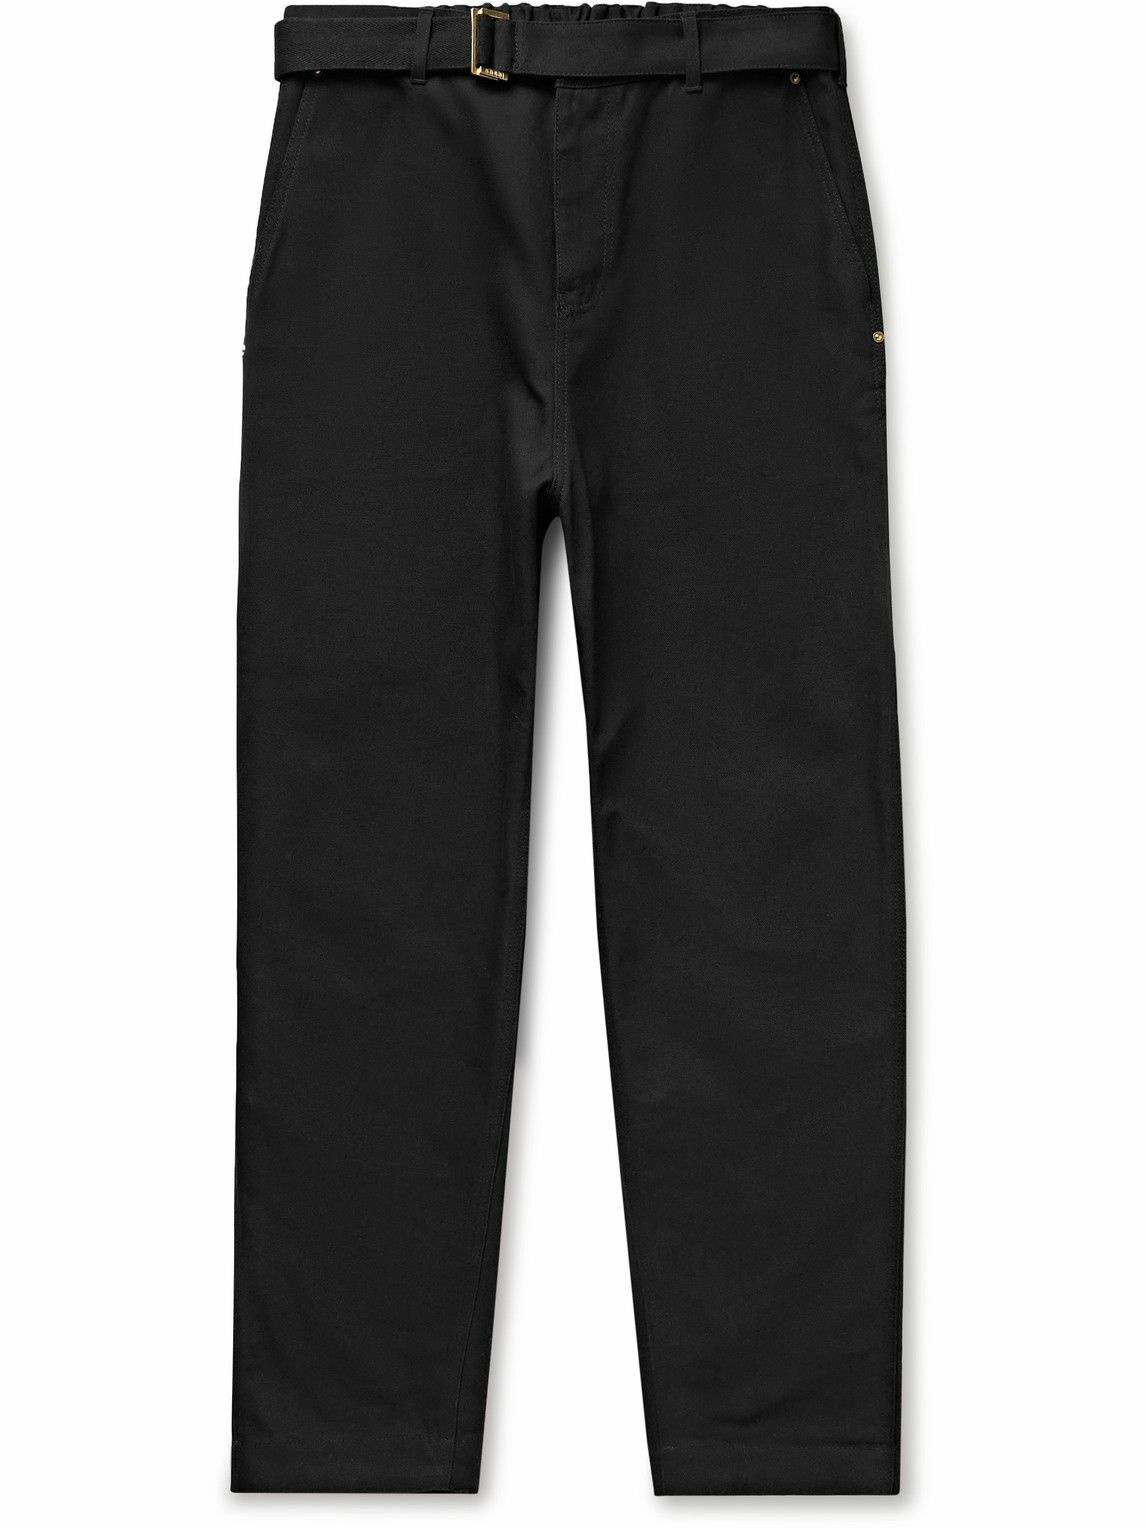 Sacai - Carhartt WIP Slim-Fit Belted Cotton-Canvas Trousers